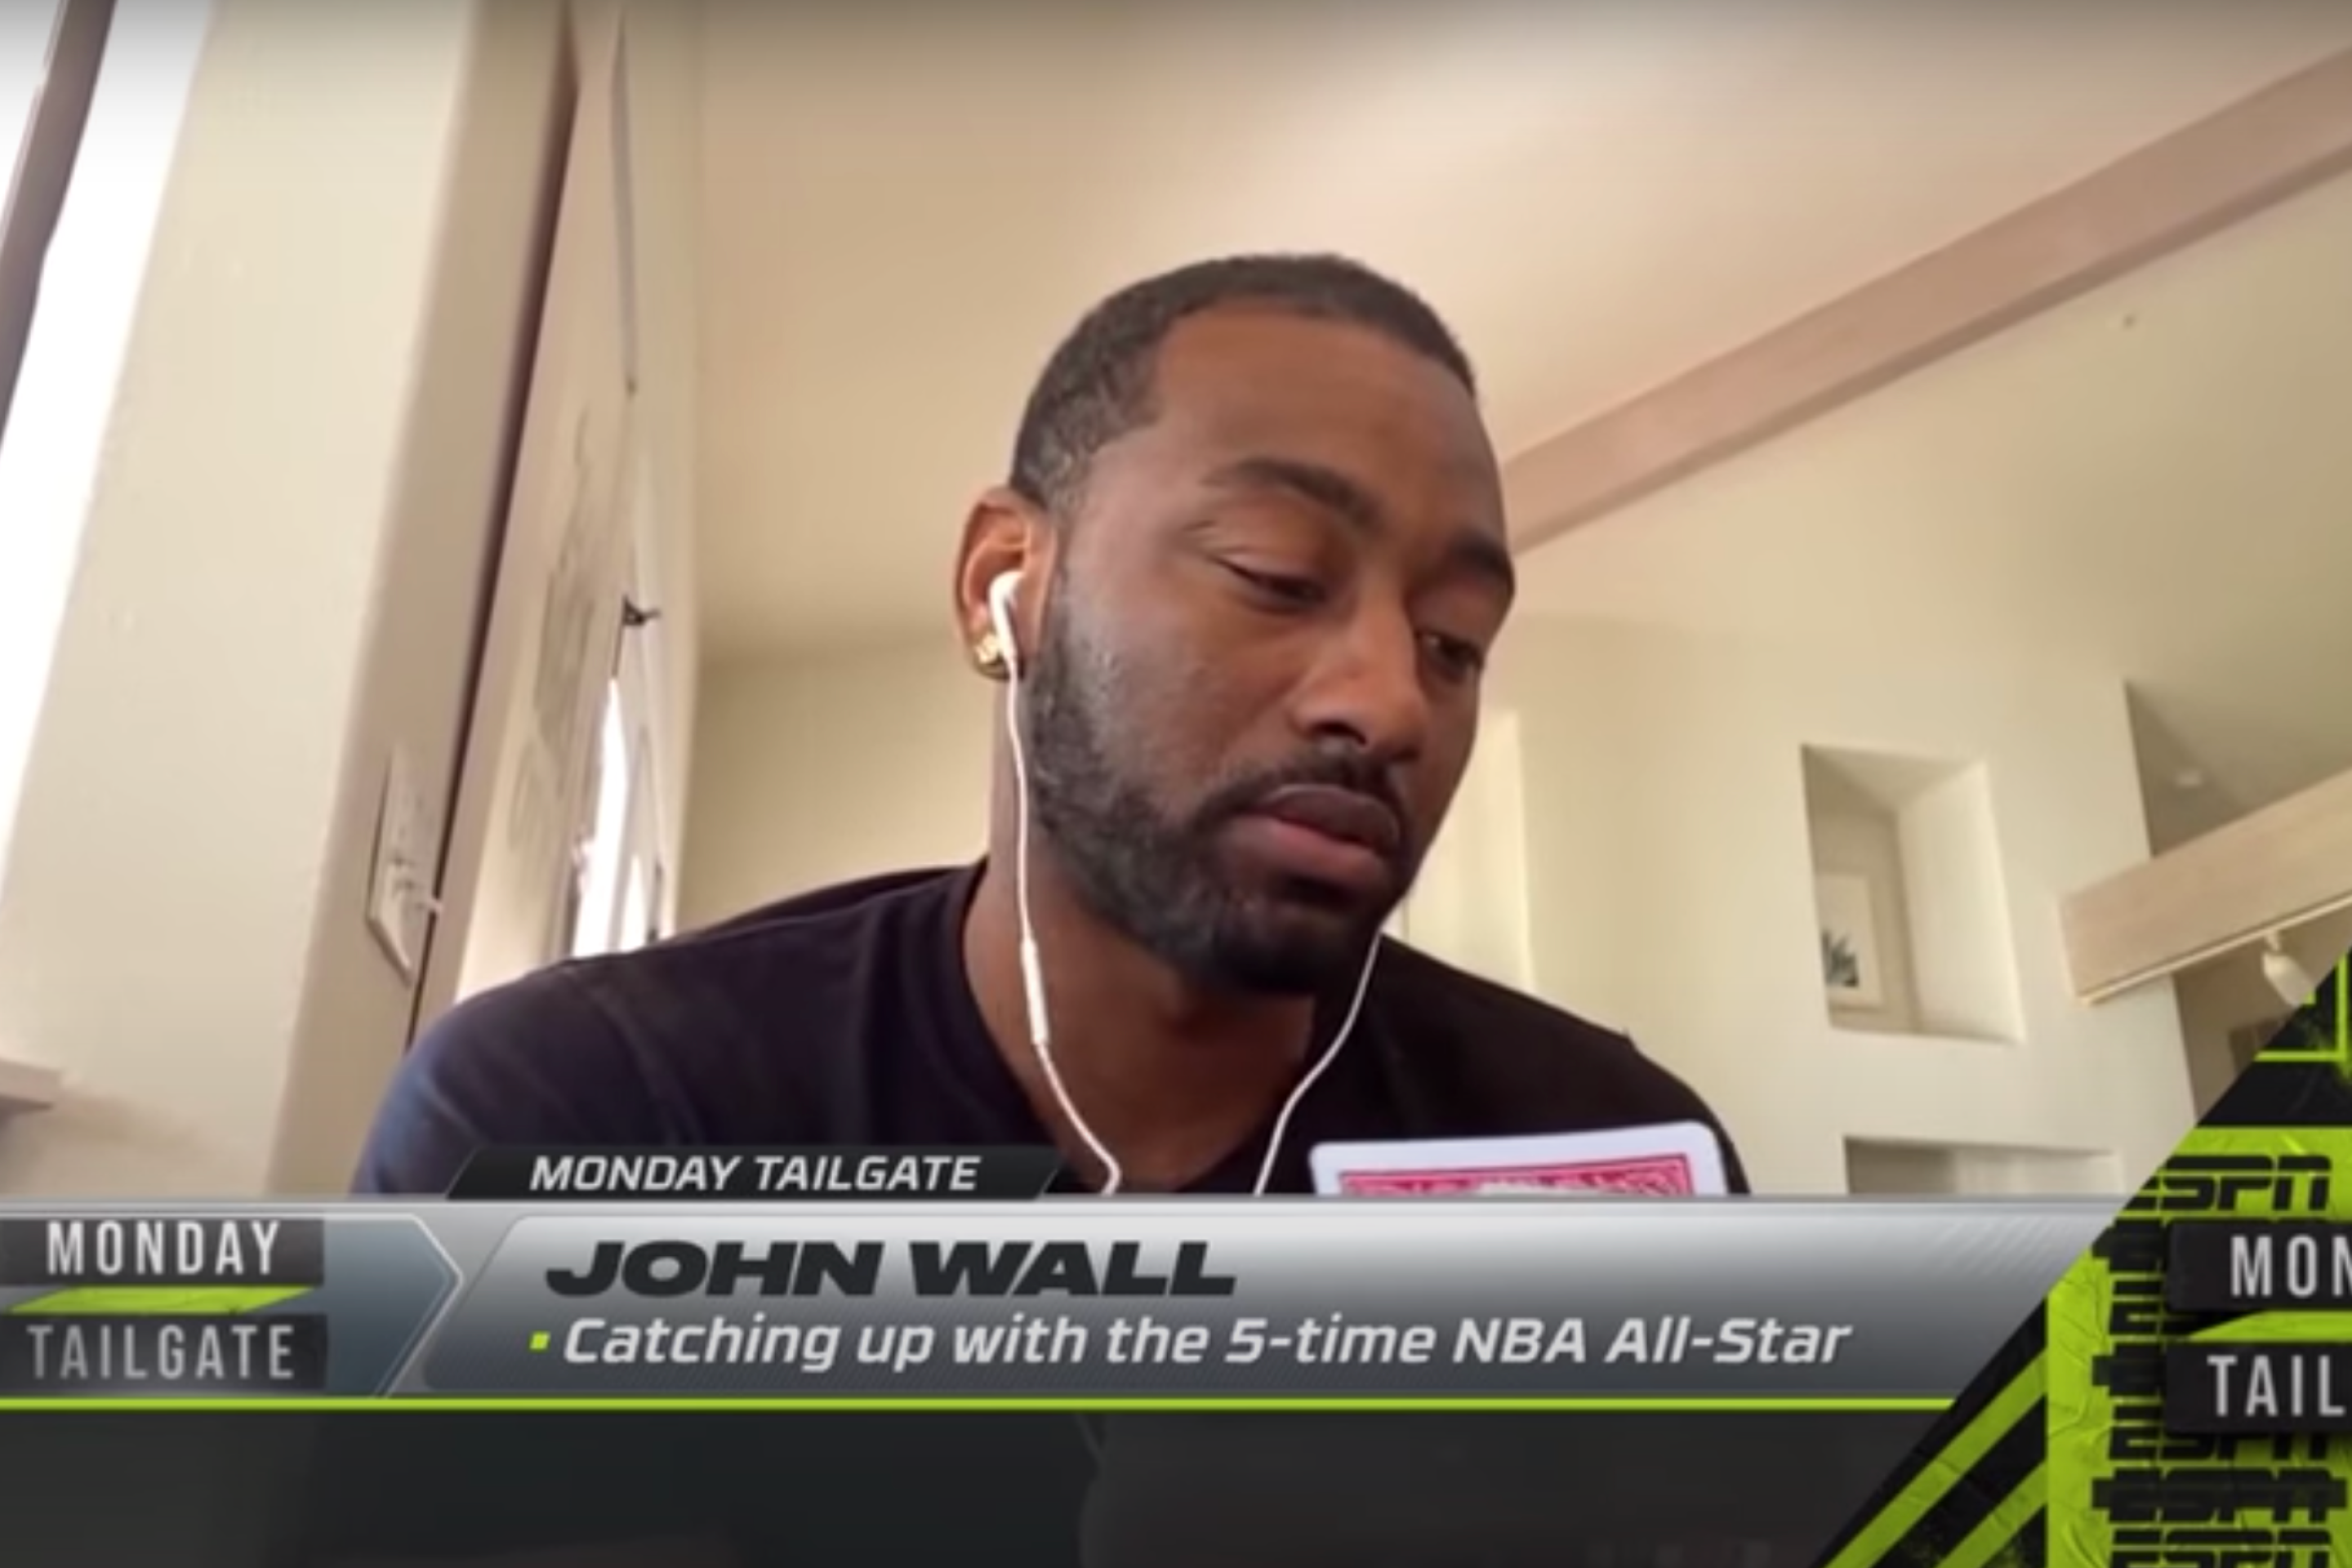 John Wall examines his cards during a live TV segment